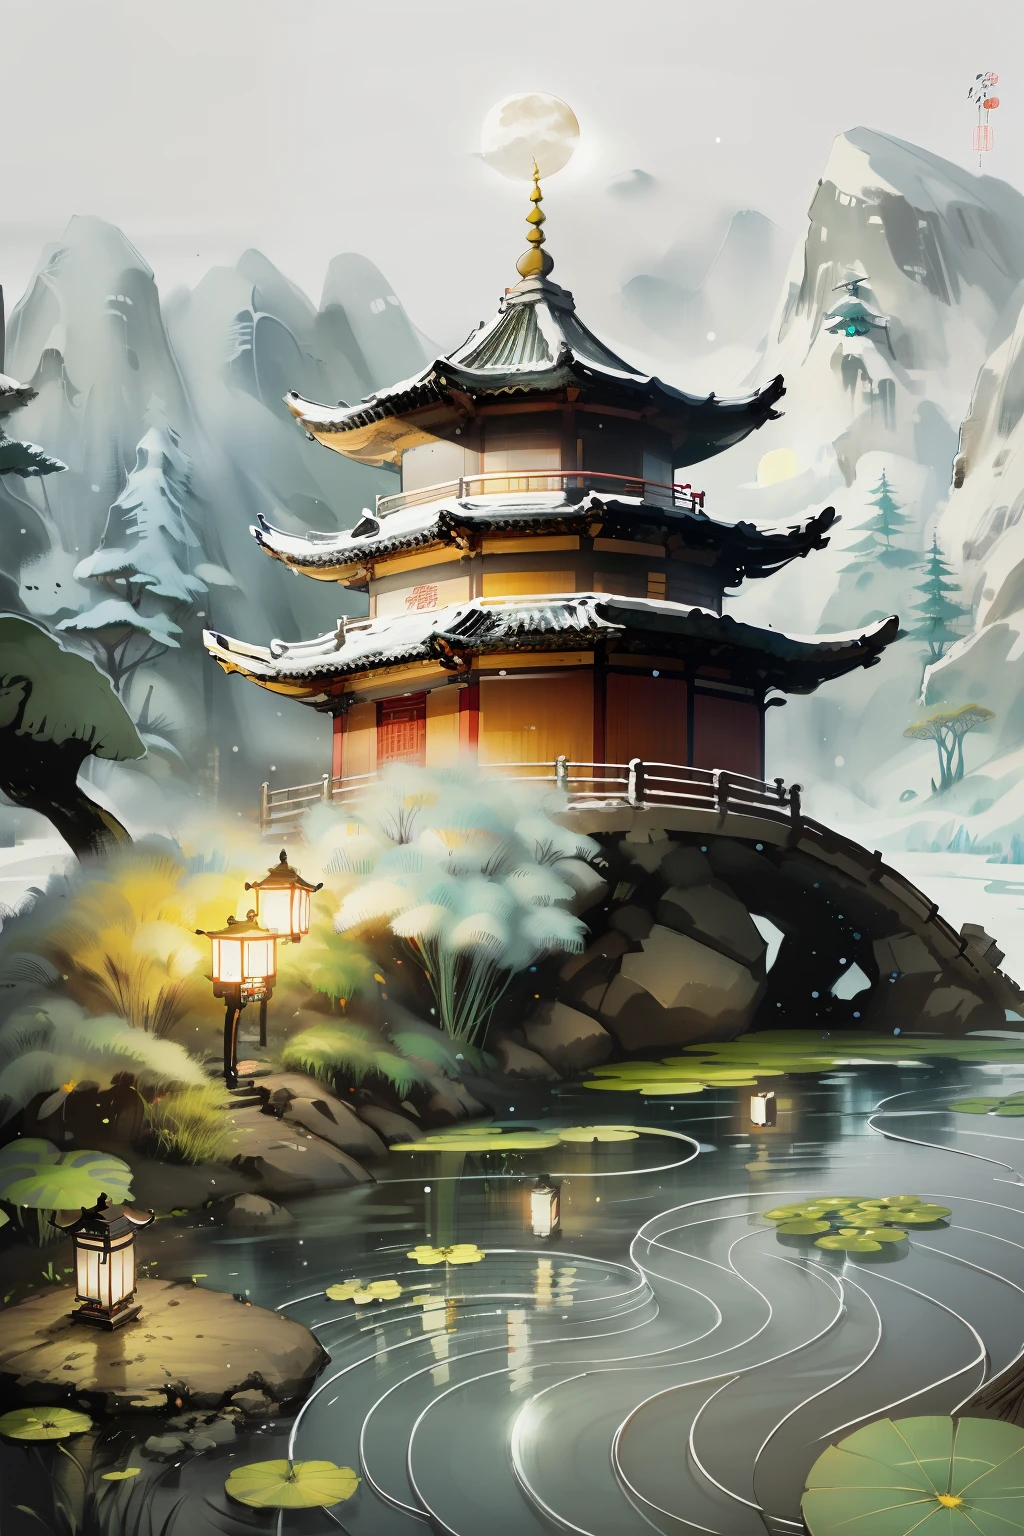 masterpiece,best quality,Chinese martial arts style,an snowing asian night scene with lanterns and water lilies,asian pond with many lanterns and boatsa night scene with many lights and boats in the water, snowflakes ,Lake surface, lotus flowers,beautiful night scene,(((Chinese martial arts style))), with vast sky, continuous mountains and steep cliffs, ink wash style, outline light, atmospheric atmosphere, depth of field, mist rising, bamboo, pine trees, octagonal stone pavilion, waterfall flowing water,big full moon,(No color) , Monochrome, light color,